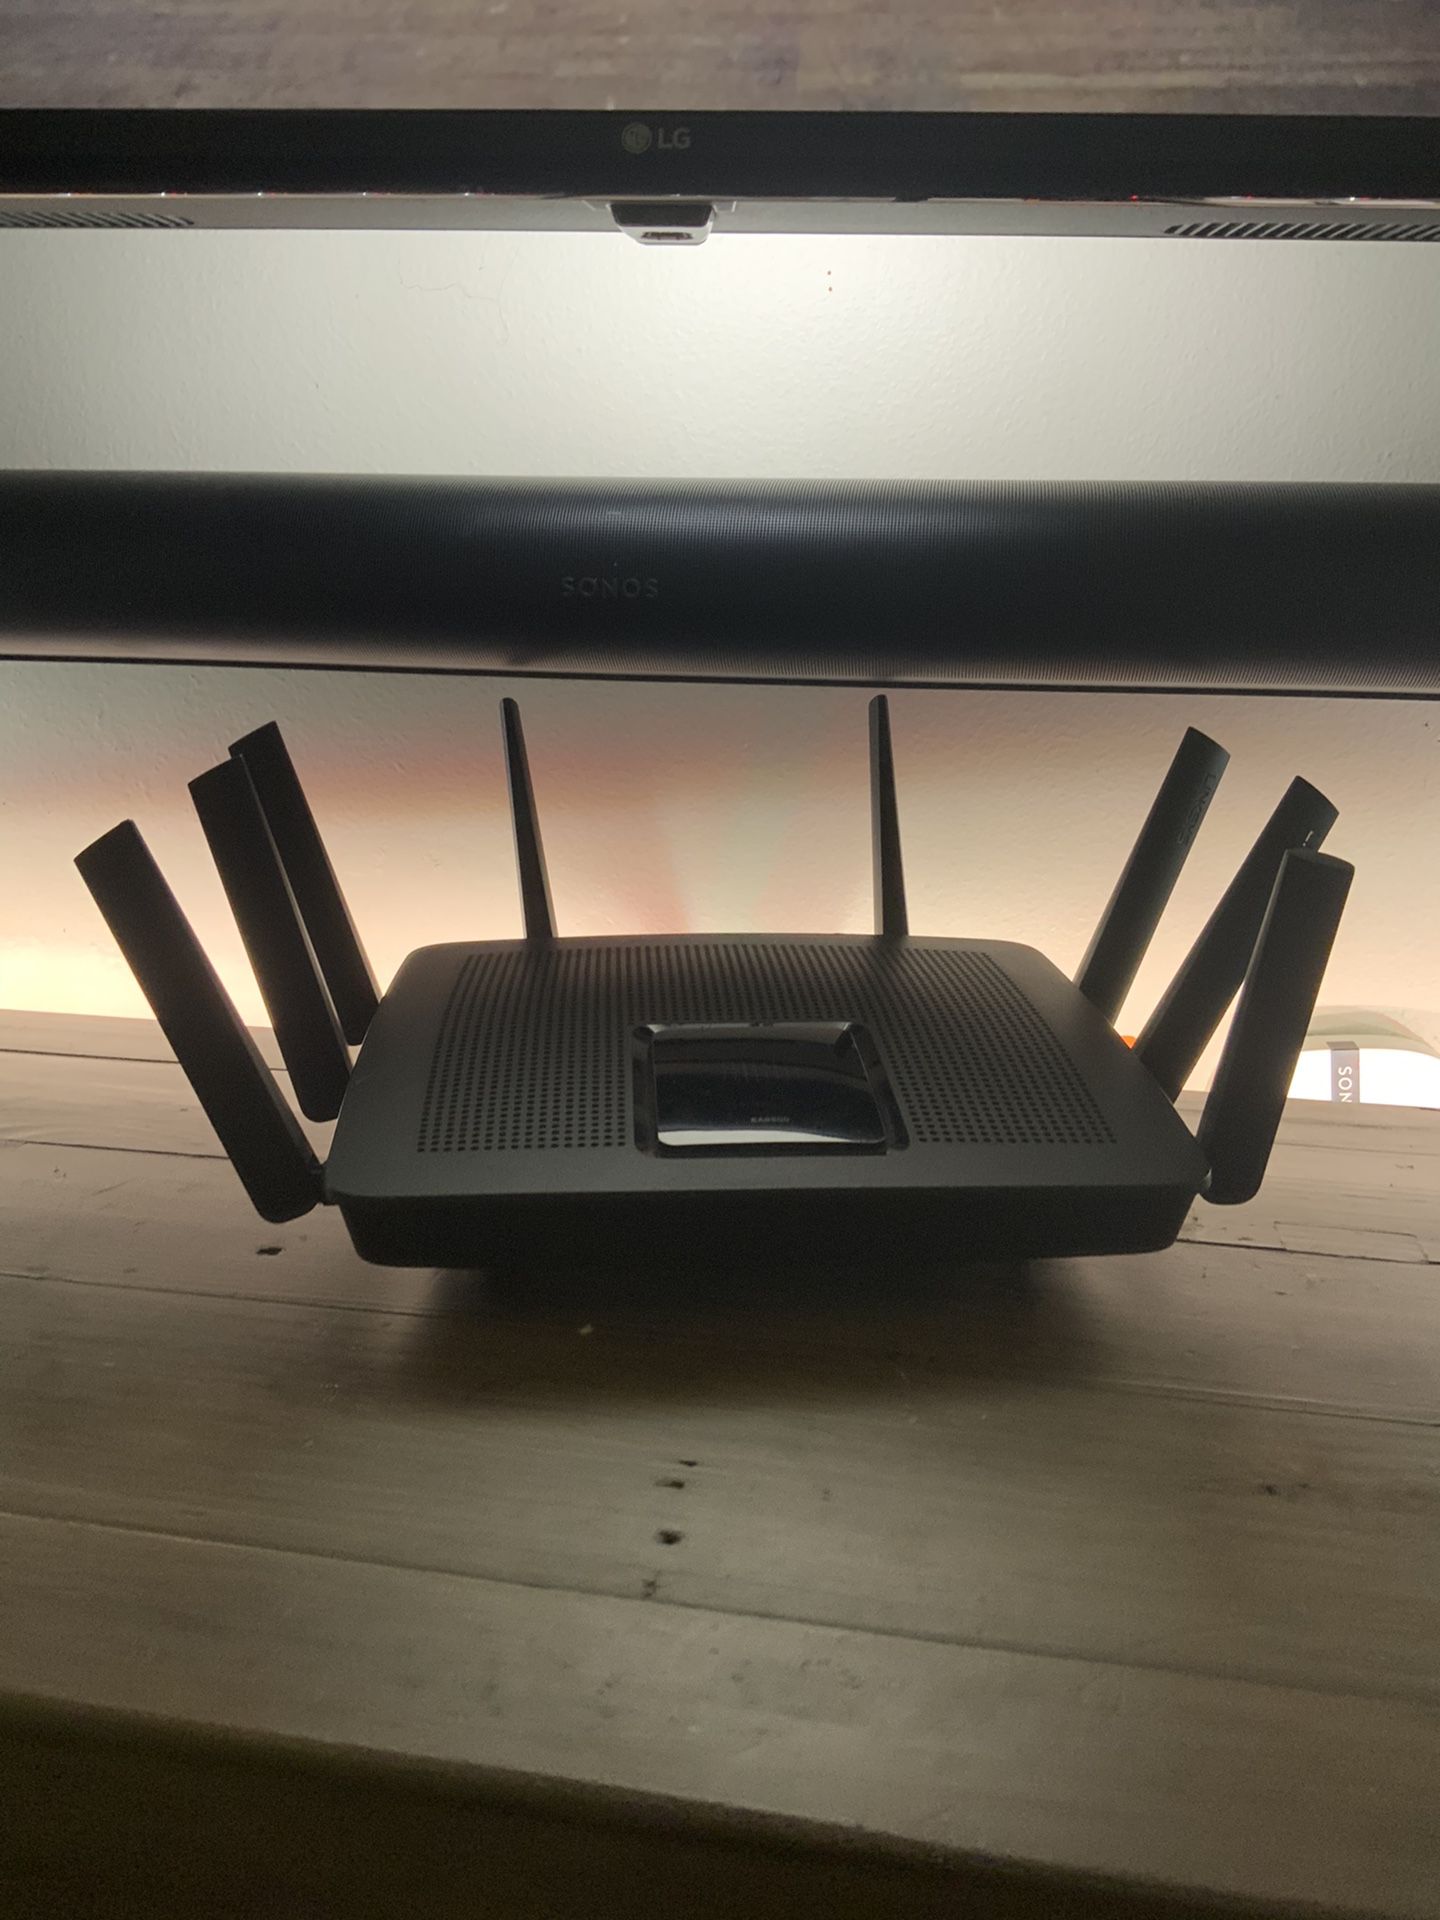 4K/HD Tri-Band Linksys Router